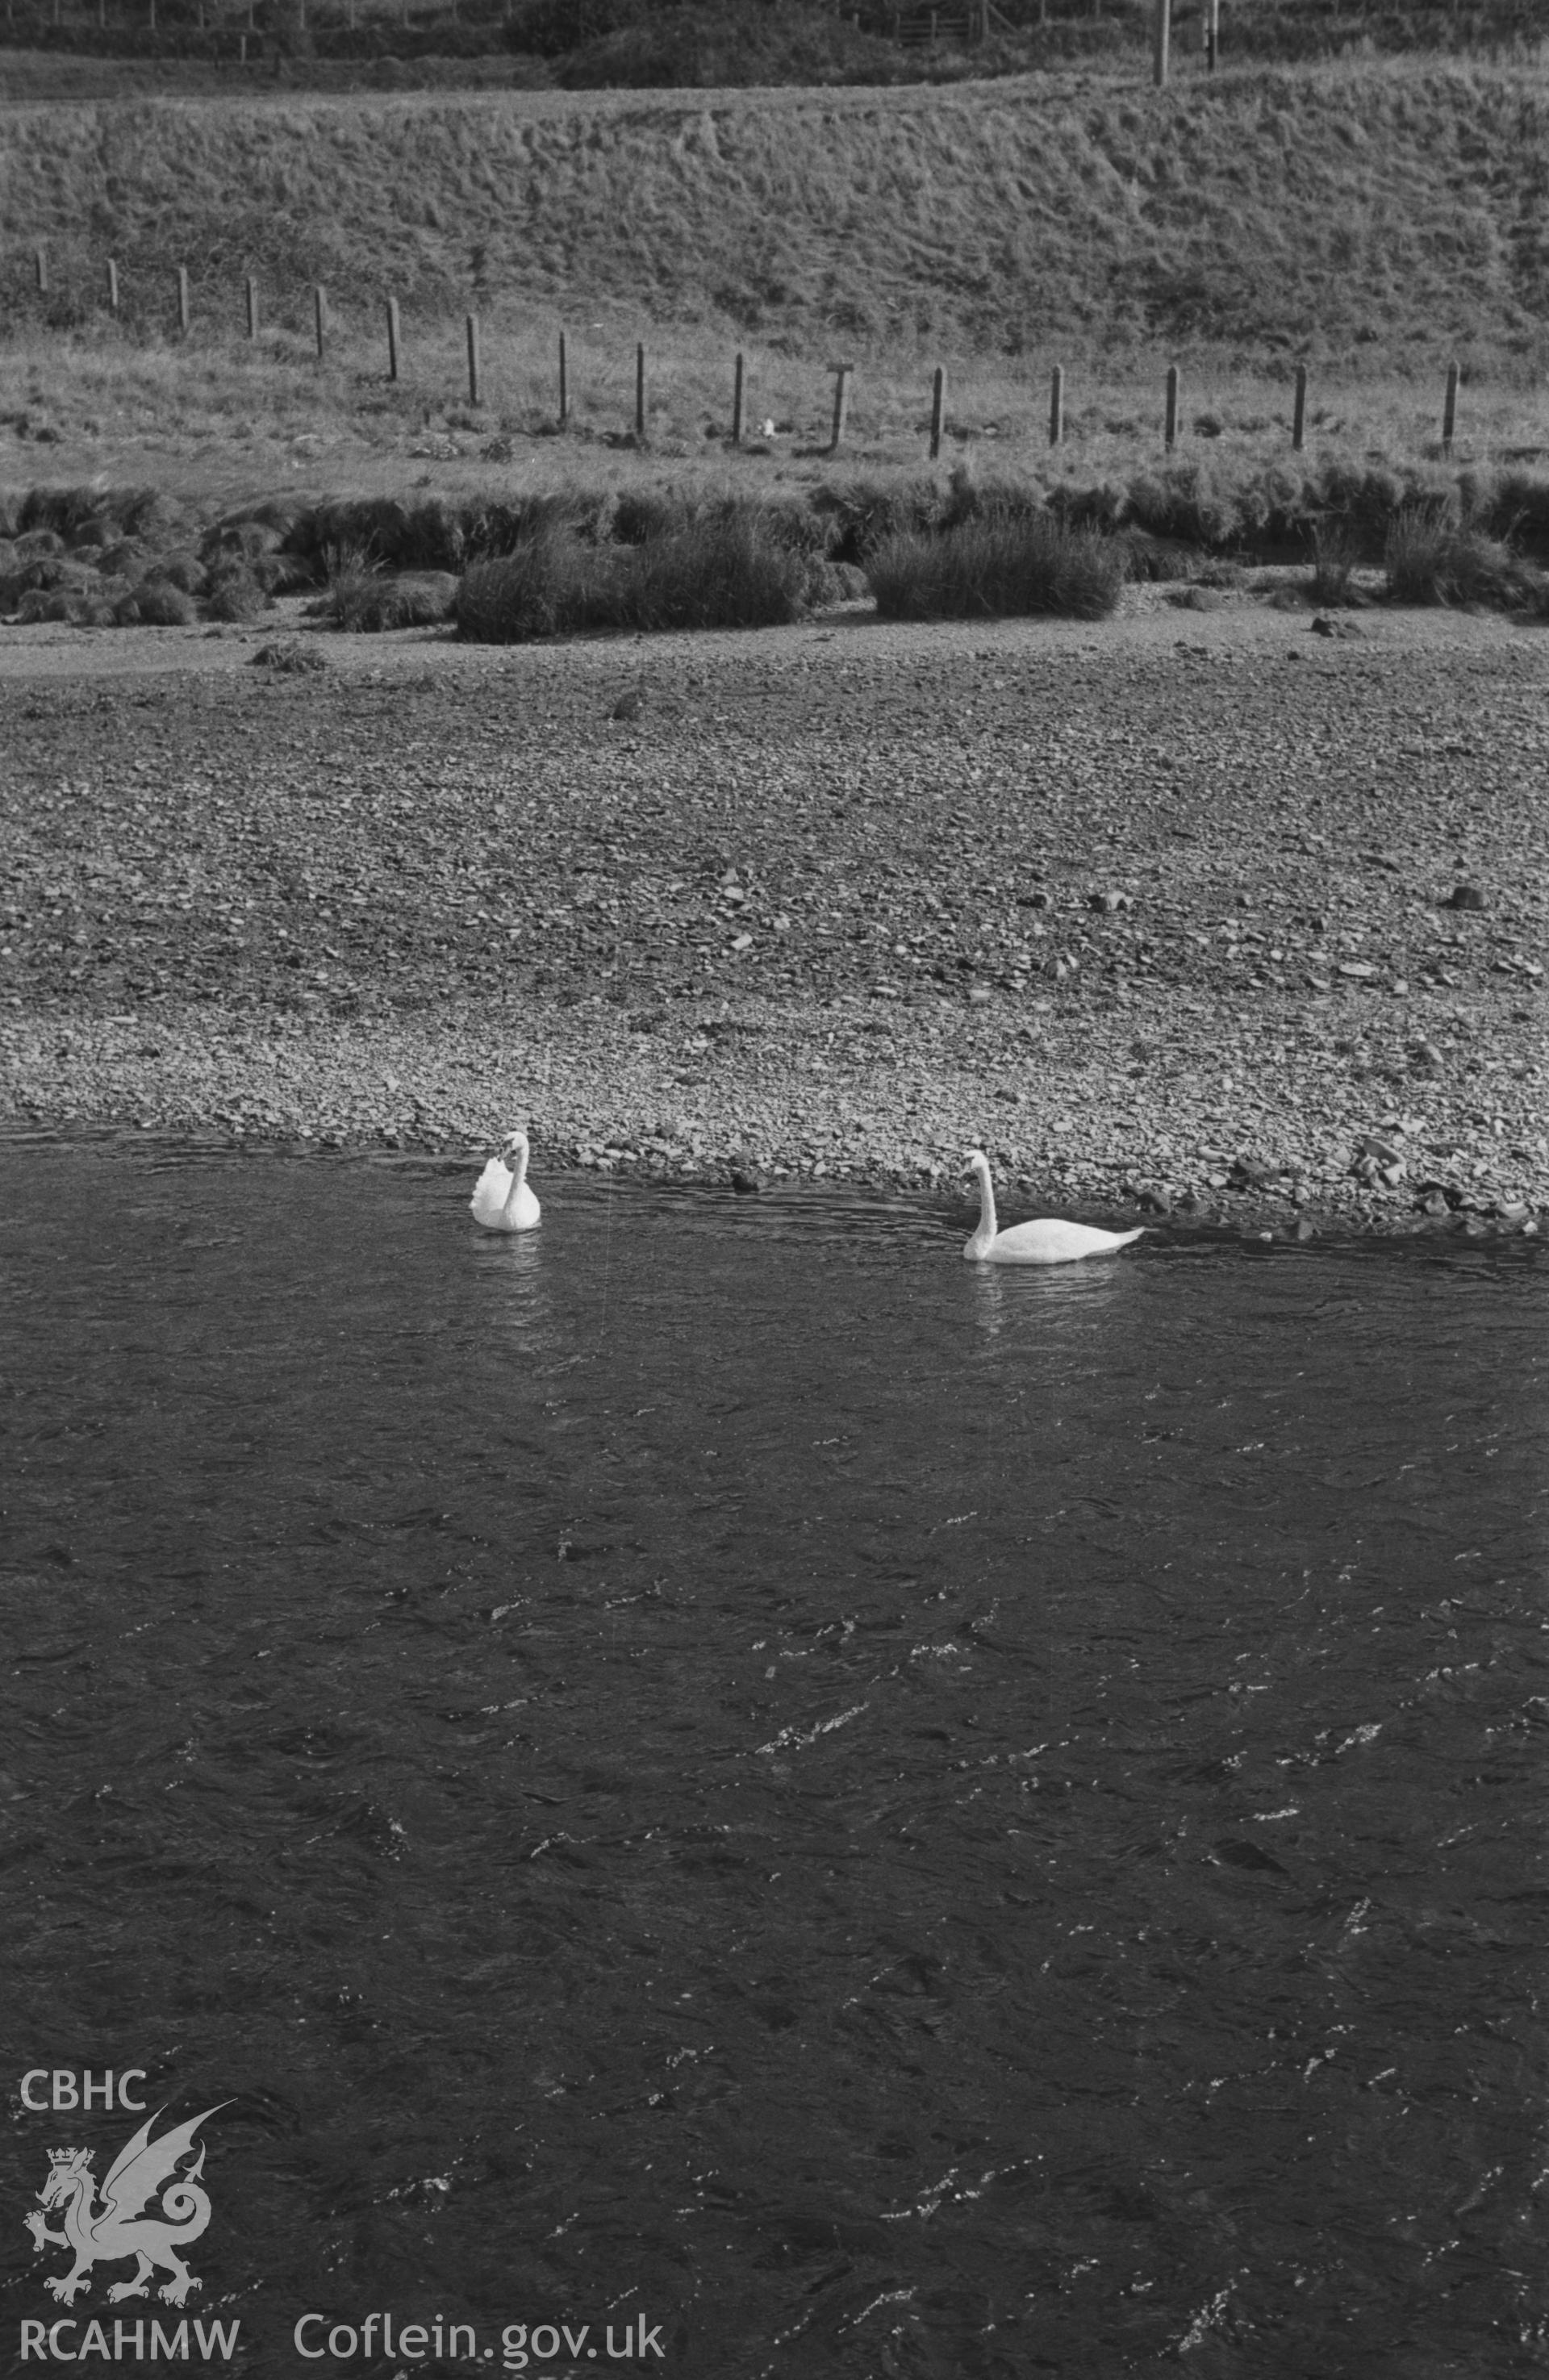 Digital copy of a black and white negative showing mute swans on the Ystwyth river just above the Isolation Flats at Tanybwlch, Aberystwyth. Photographed by Arthur O. Chater in September 1964 from Grid Reference SN 5800 8057, looking east.